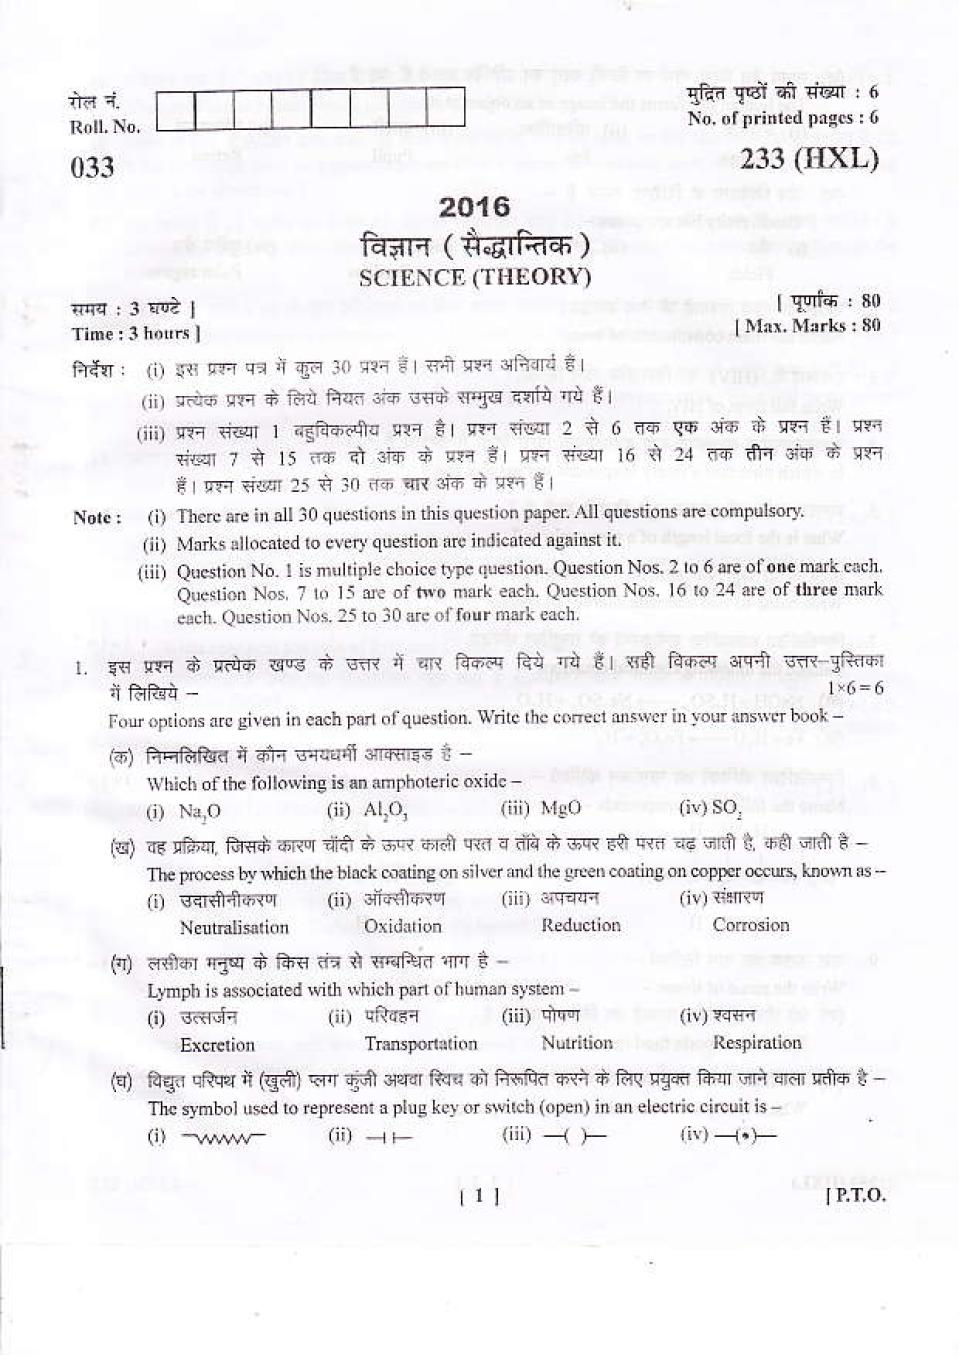 Uttarakhand Board Class 10 Question Paper 2016 for Science - Page 1